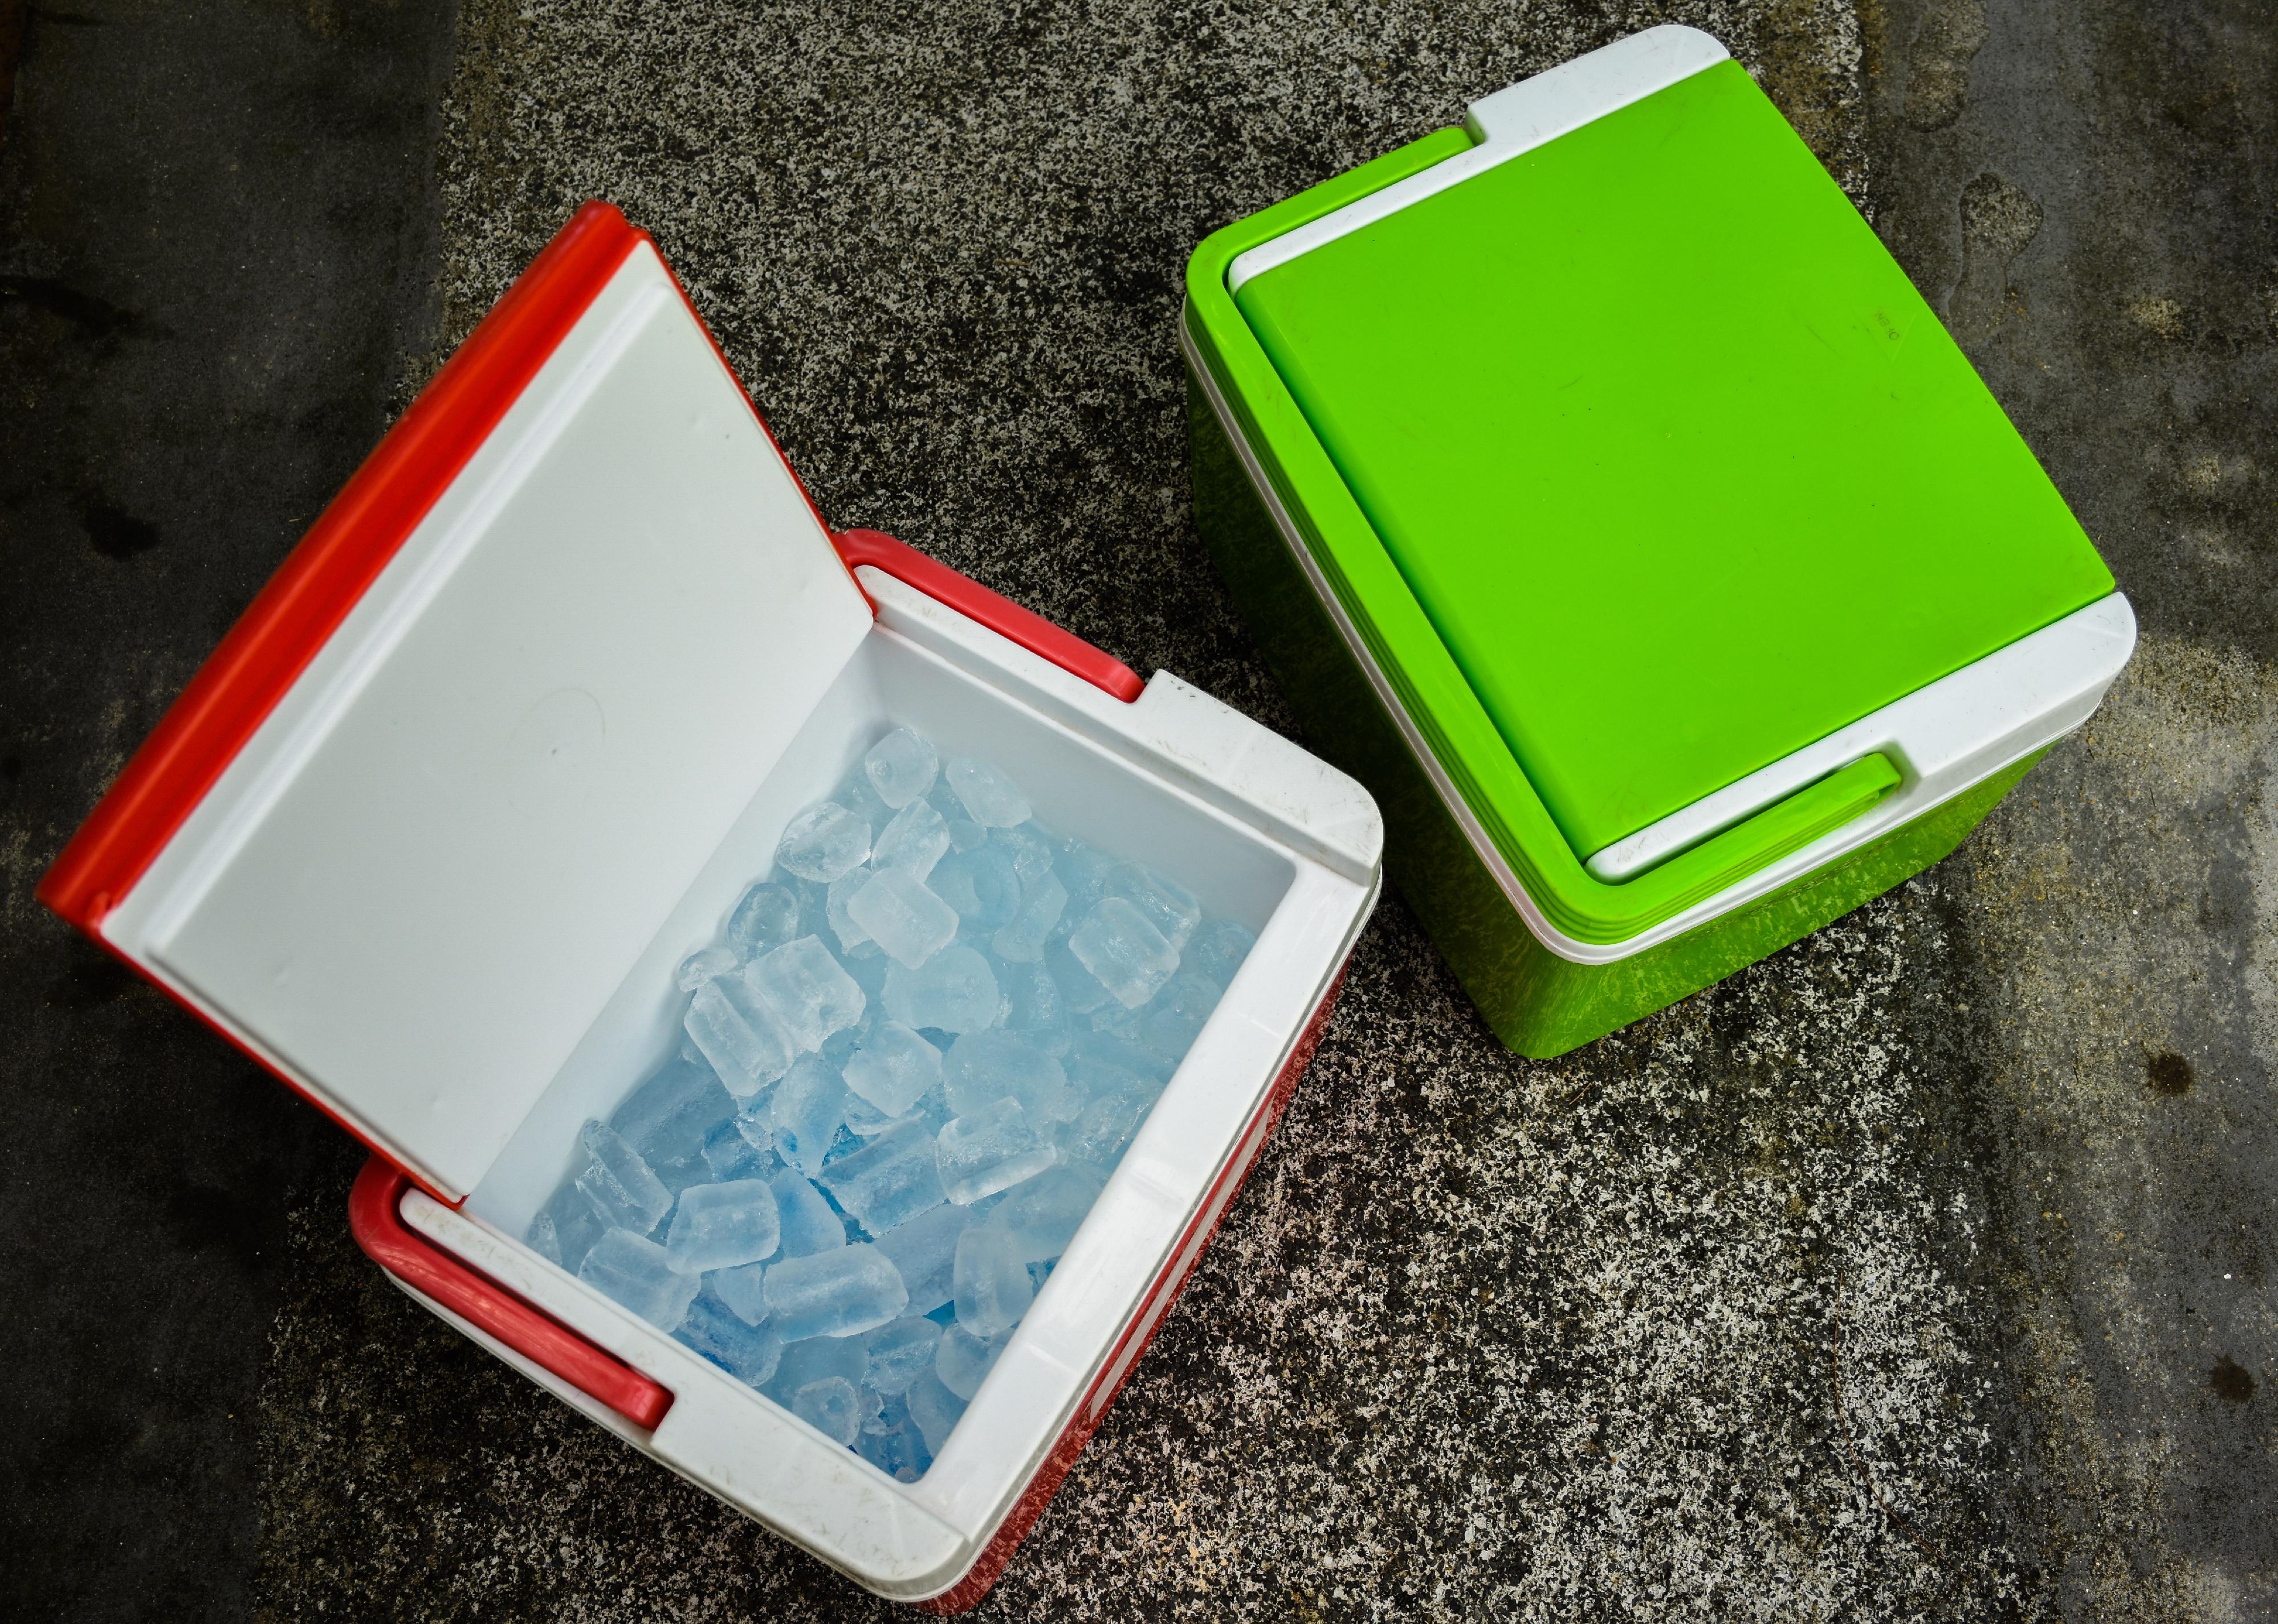 Top view of picnic cooler box with and ice cube on the ground